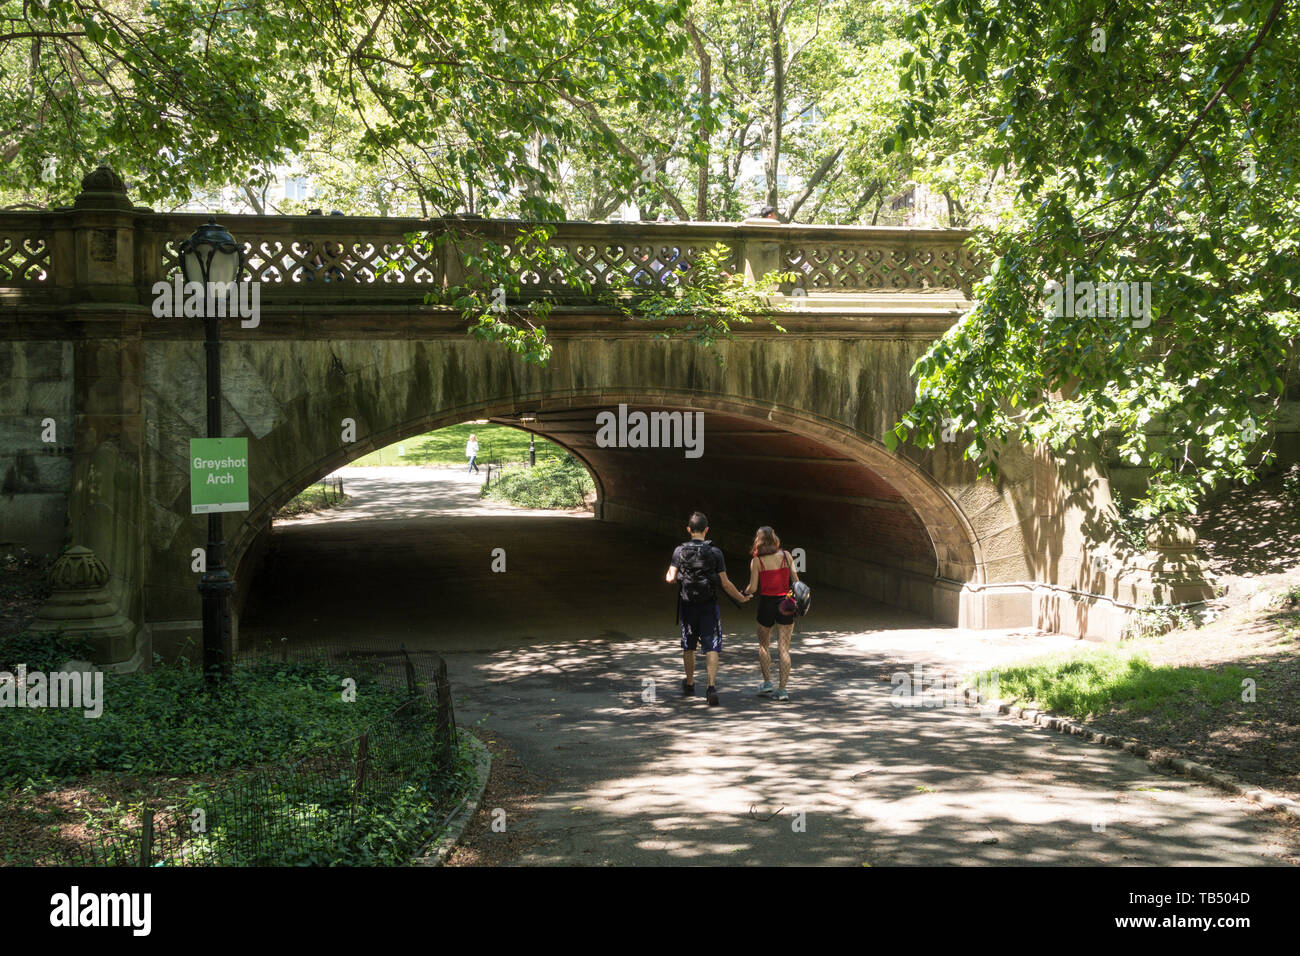 Greyshot Arch is popular with Tourists, Central park, NYc, USA Stock Photo